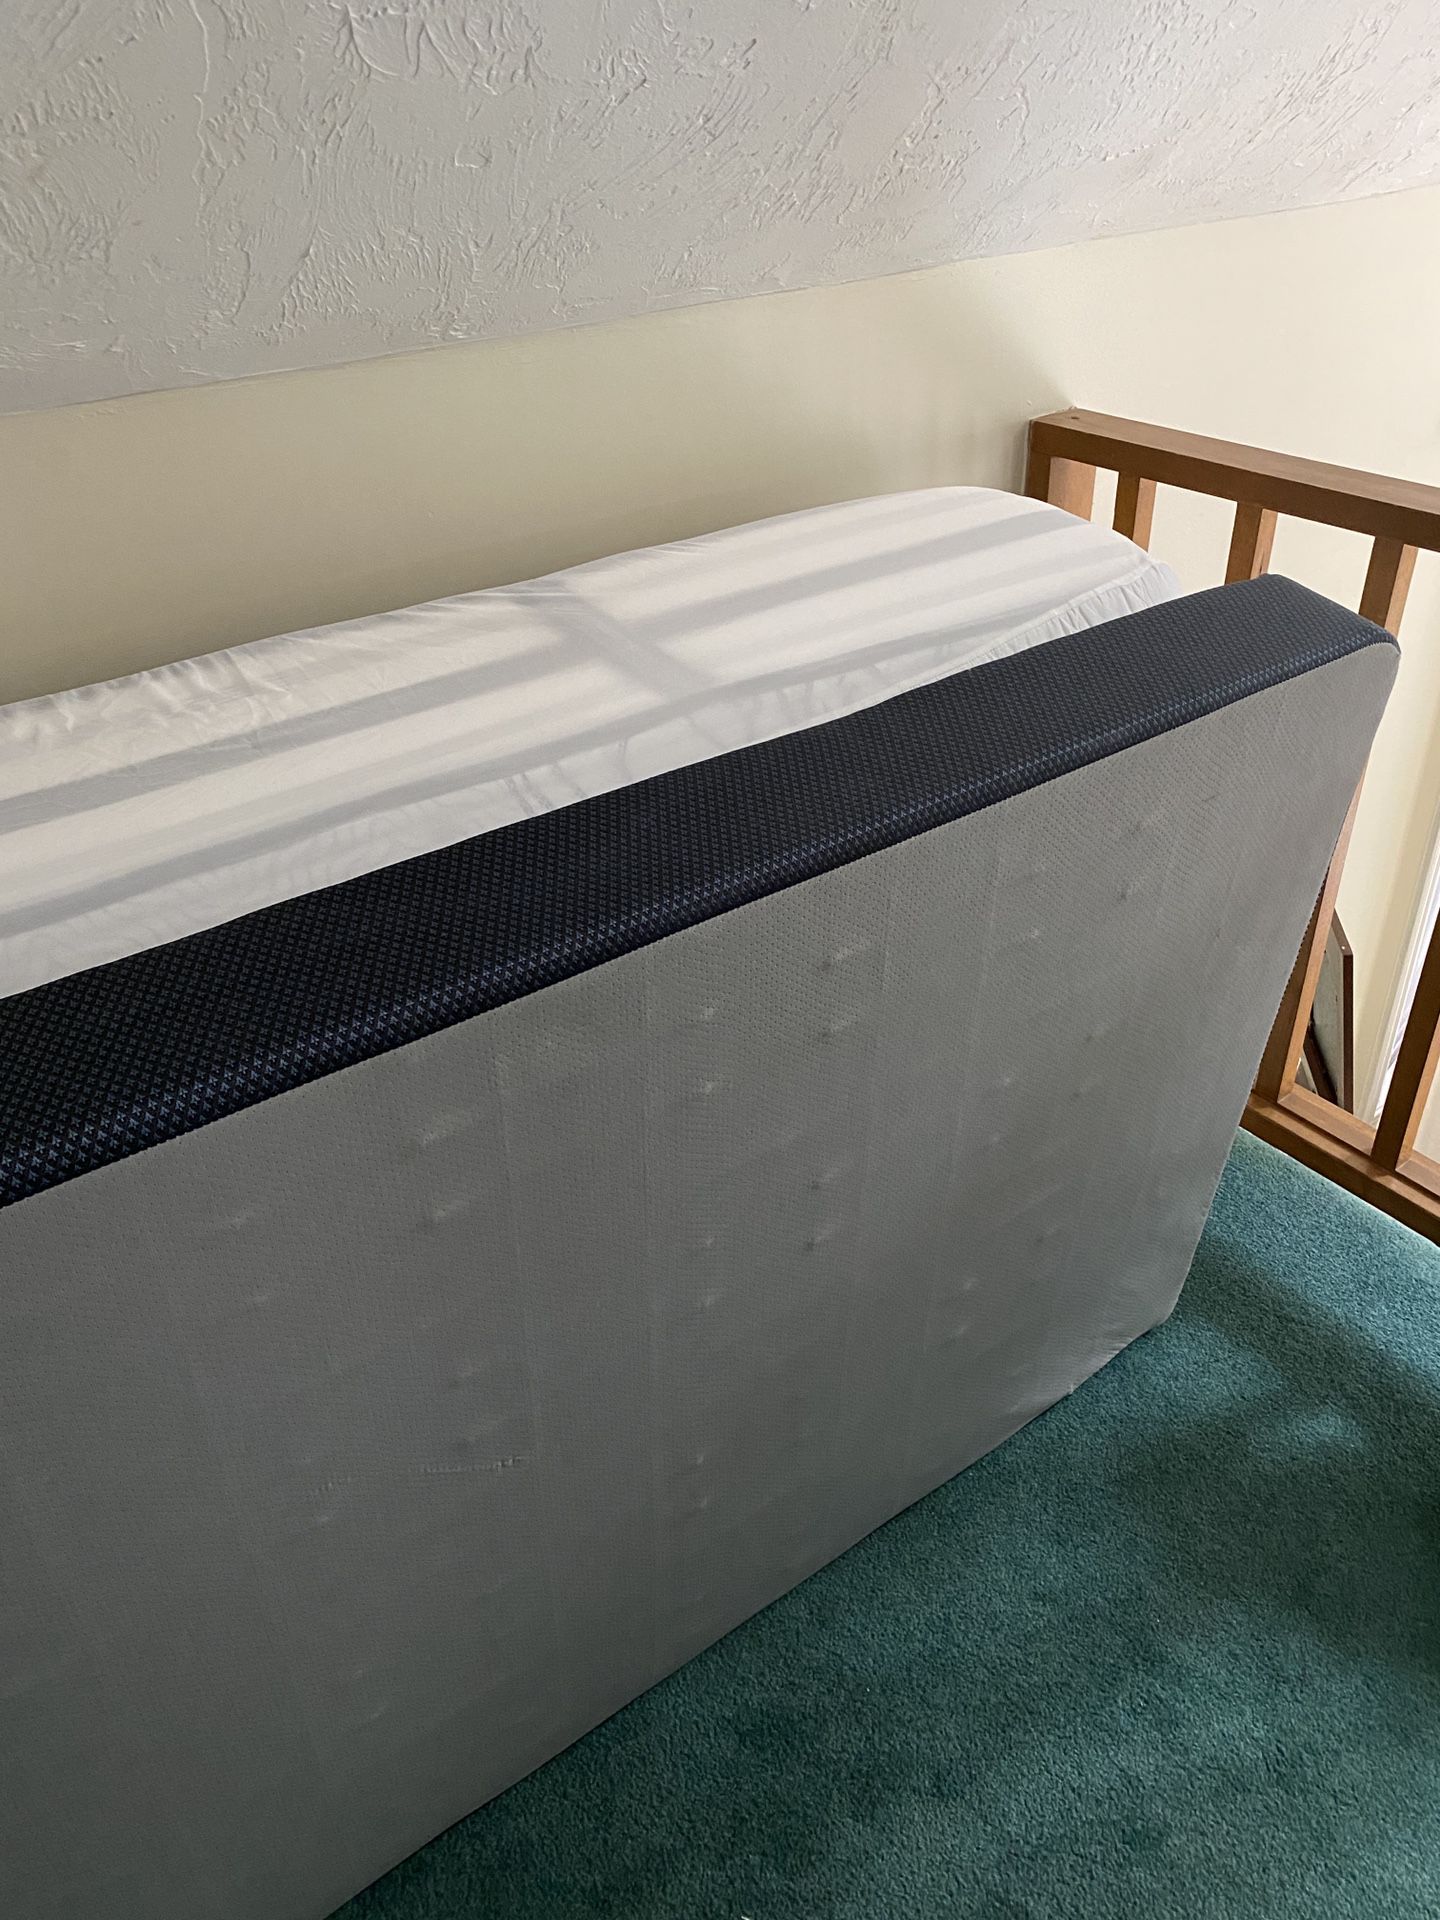 Extra deep twin XL mattress and box spring, excellent condition